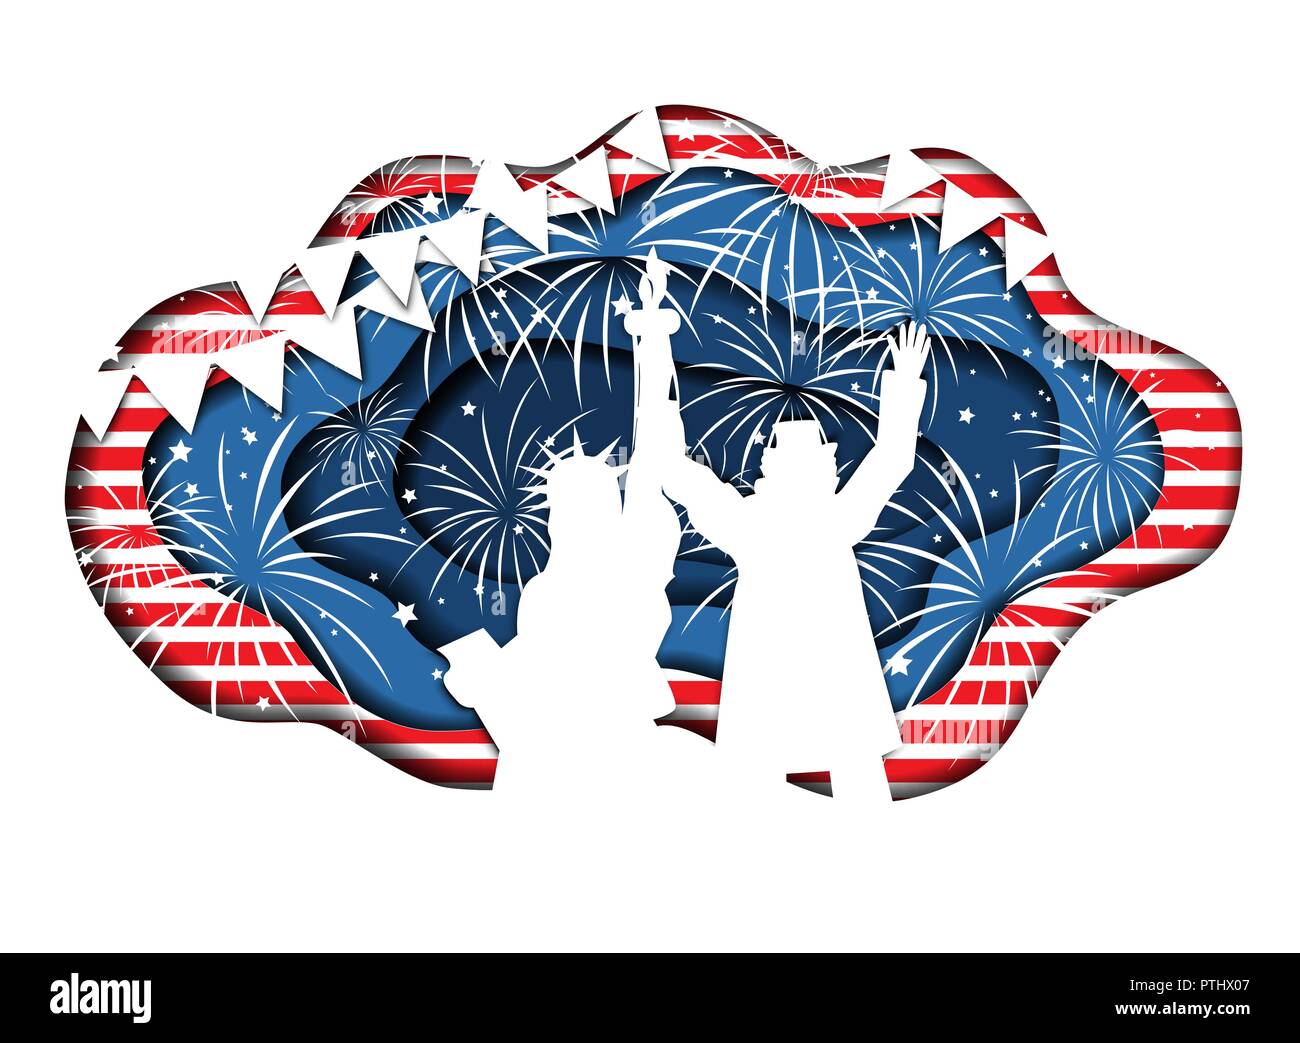 Funny paper cut banner for Independence Day July 4 USA with Statue of Liberty and Uncle Sam together. Vector illustration. National symbols and colors Stock Vector